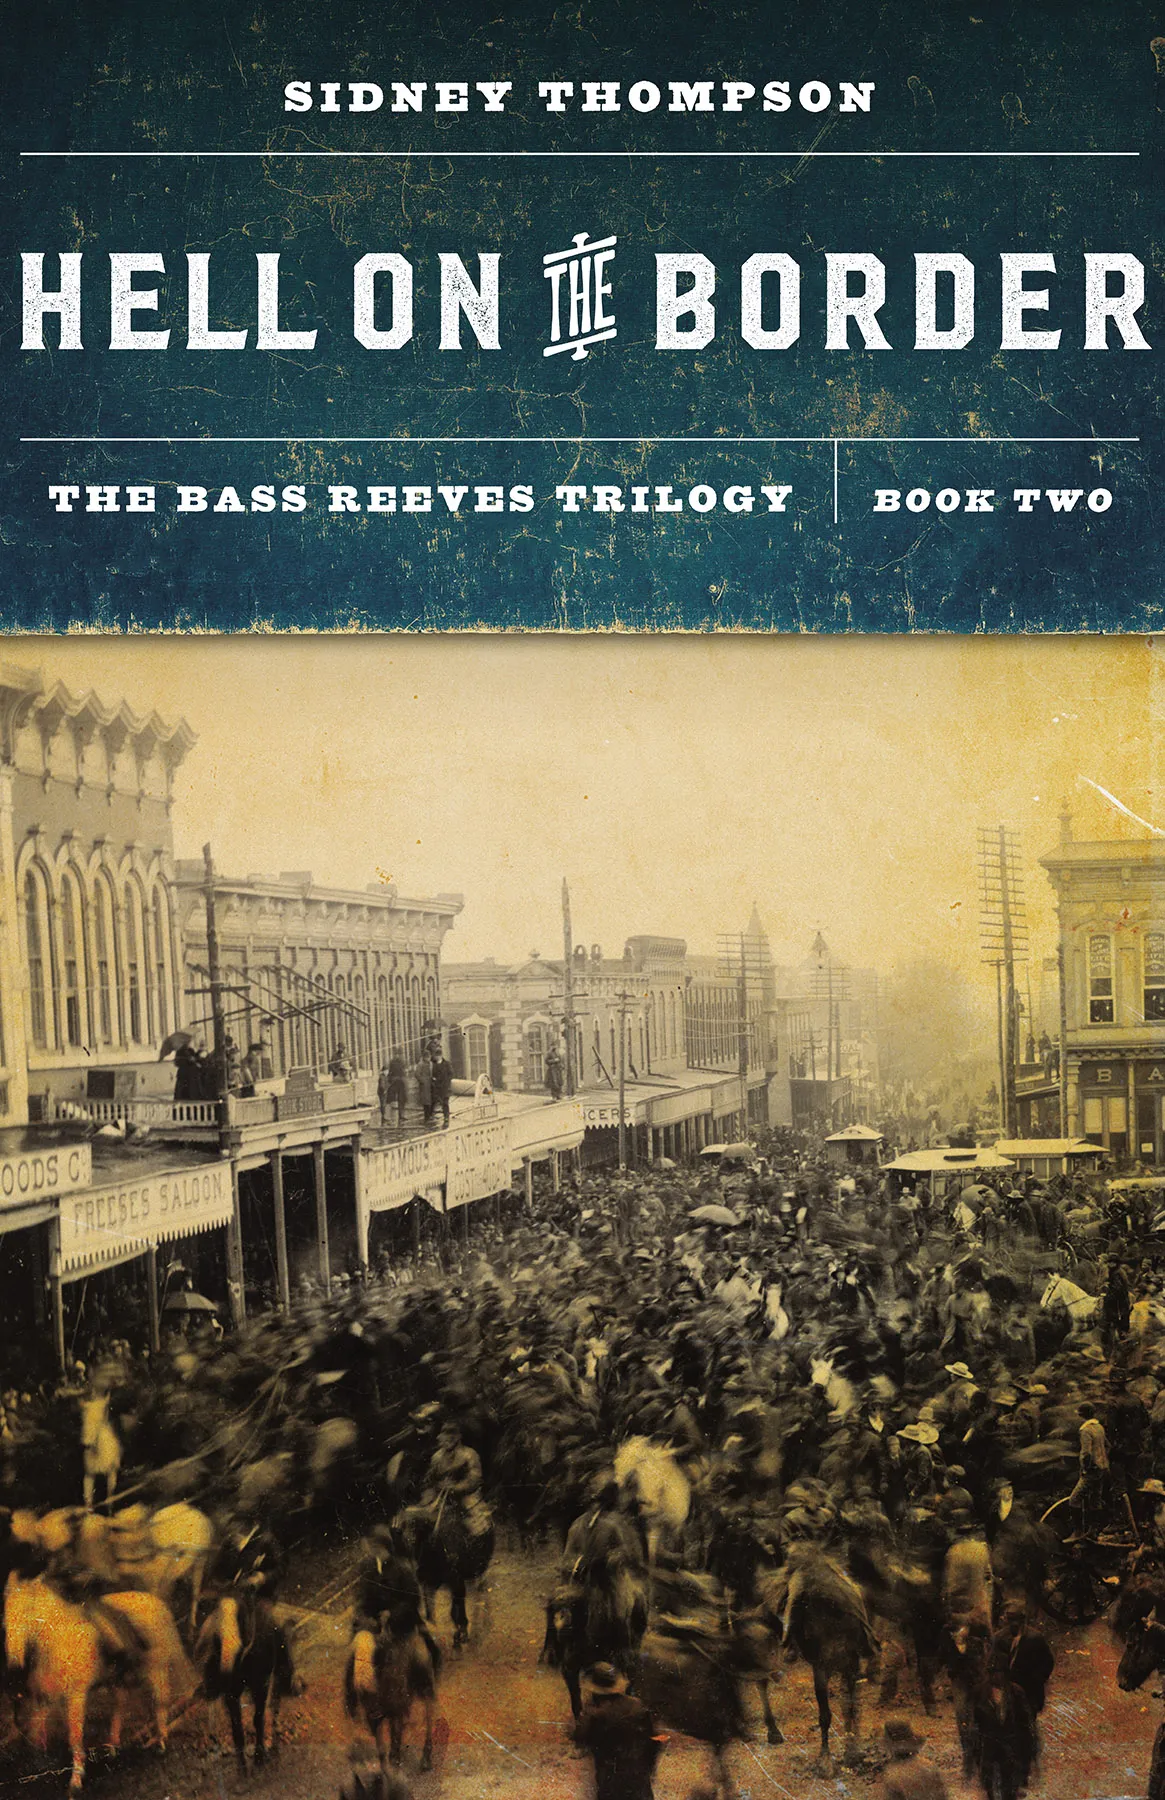 Hell on the Border (The Bass Reeves Trilogy #2)